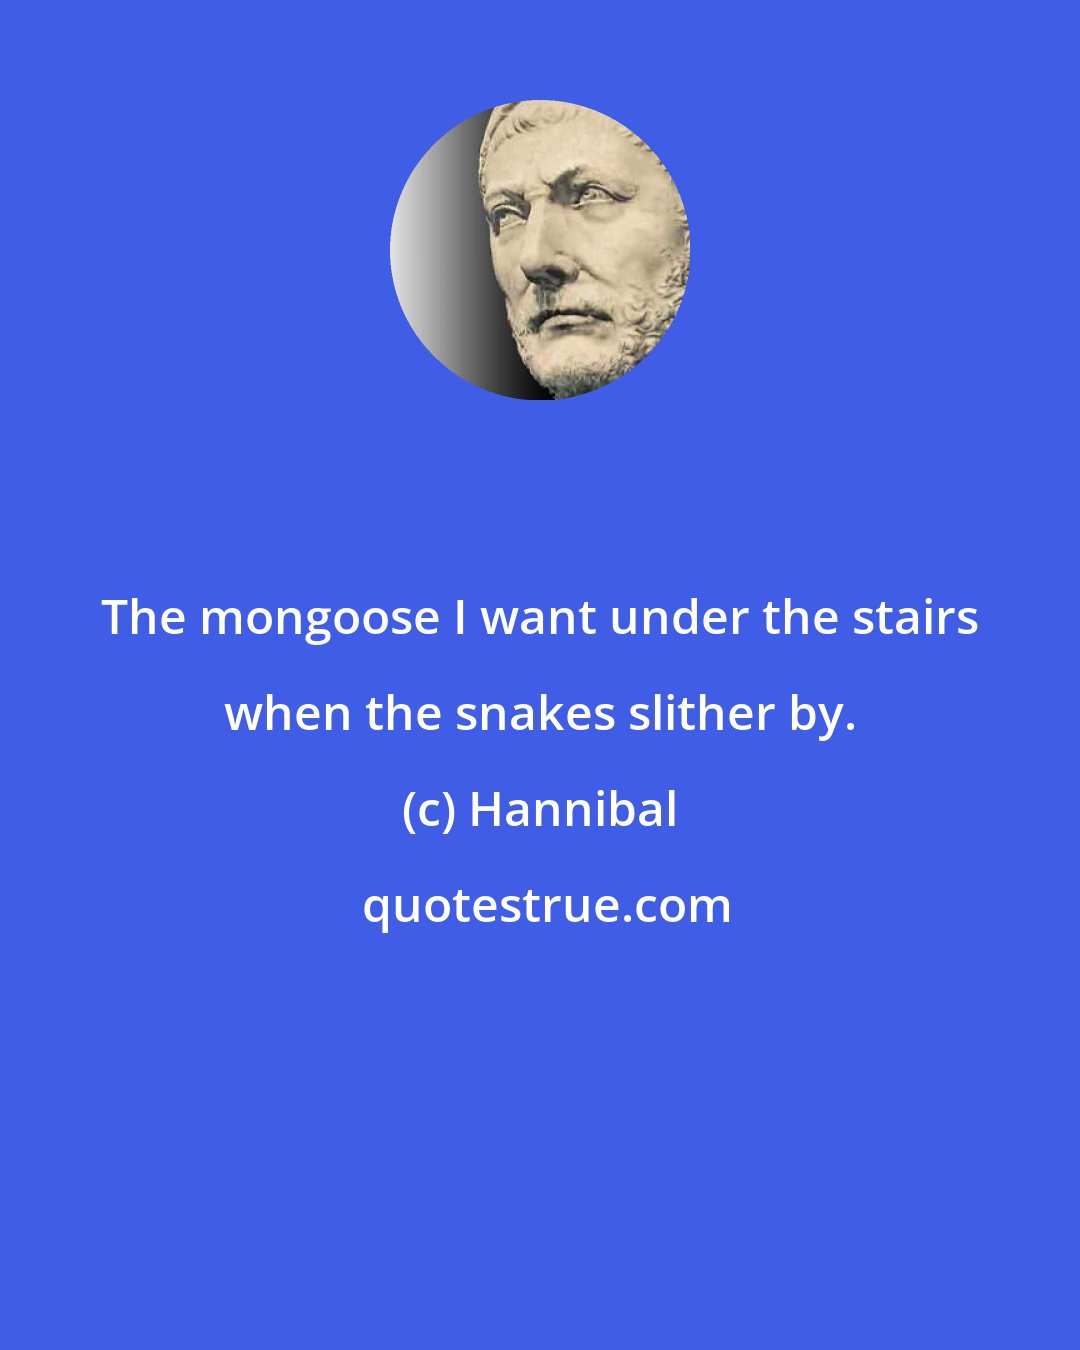 Hannibal: The mongoose I want under the stairs when the snakes slither by.